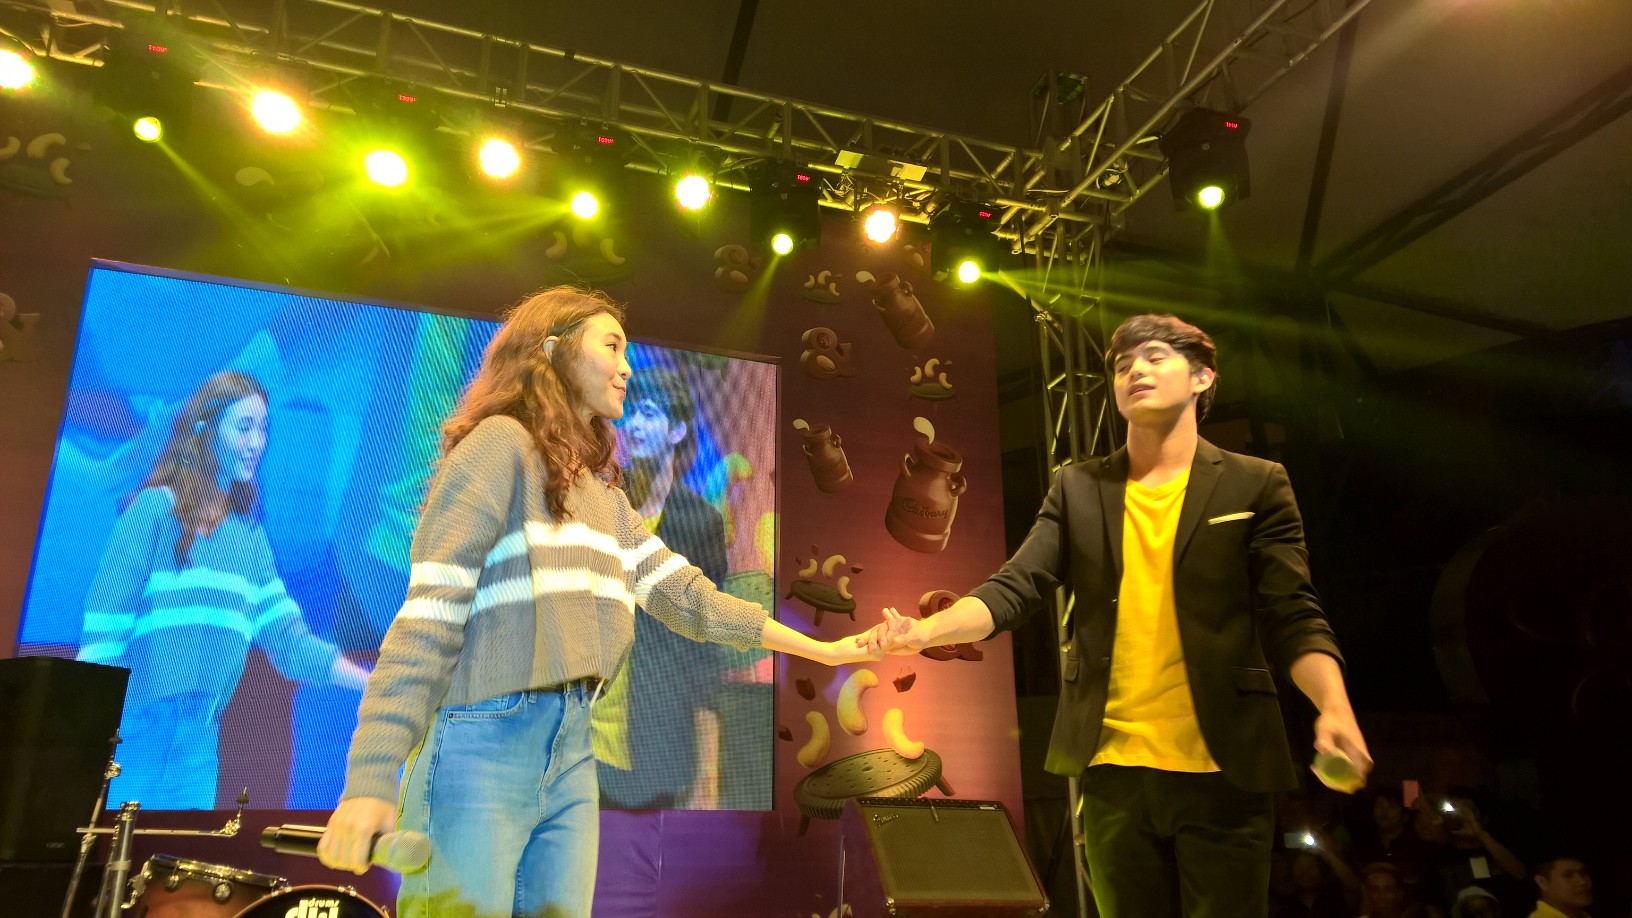 James Reid sings on stage with a lucky fan. ARVIN MENDOZA